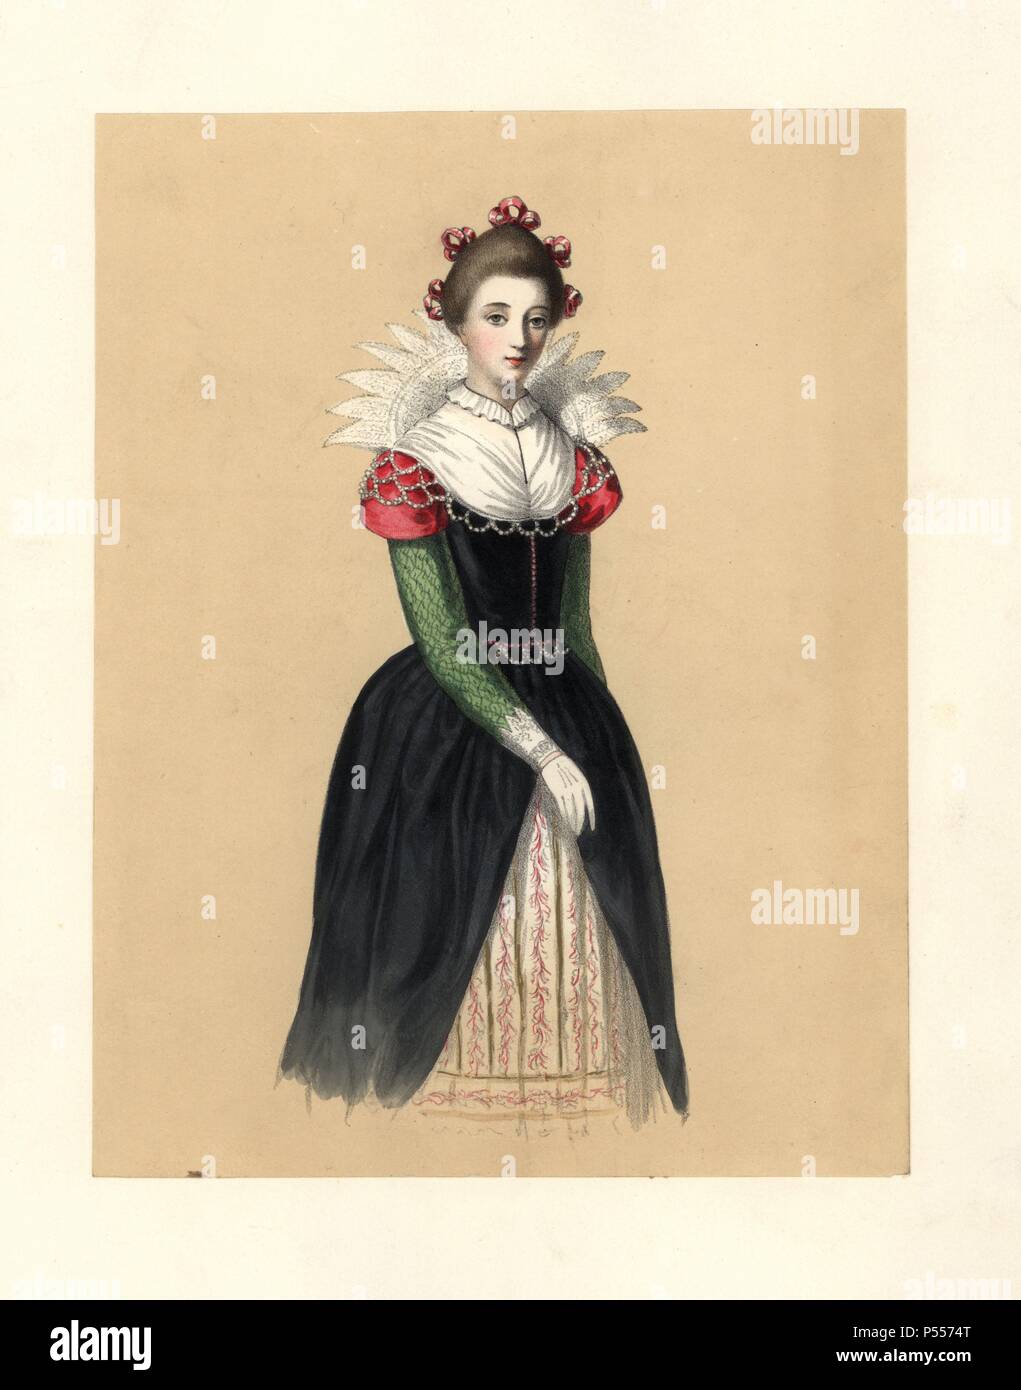 Dress during the Protectorate, 16531659. She wears five ribbons in her hair, a tall lace collar, a black dress with green sleeves and scarlet shoulders over embroidered petticoats. Based on Speed’s Map of England, portrait of Lady Croke. Handcoloured lithograph from 'Costumes of British Ladies from the Time of William the First to the Reign of Queen Victoria,” London, Dickinson & Son, 1840. 48 mounted plates of women's fashion from 1066 to 1840 based on effigies, manuscripts, portraits, prints and literary descriptions. Stock Photo